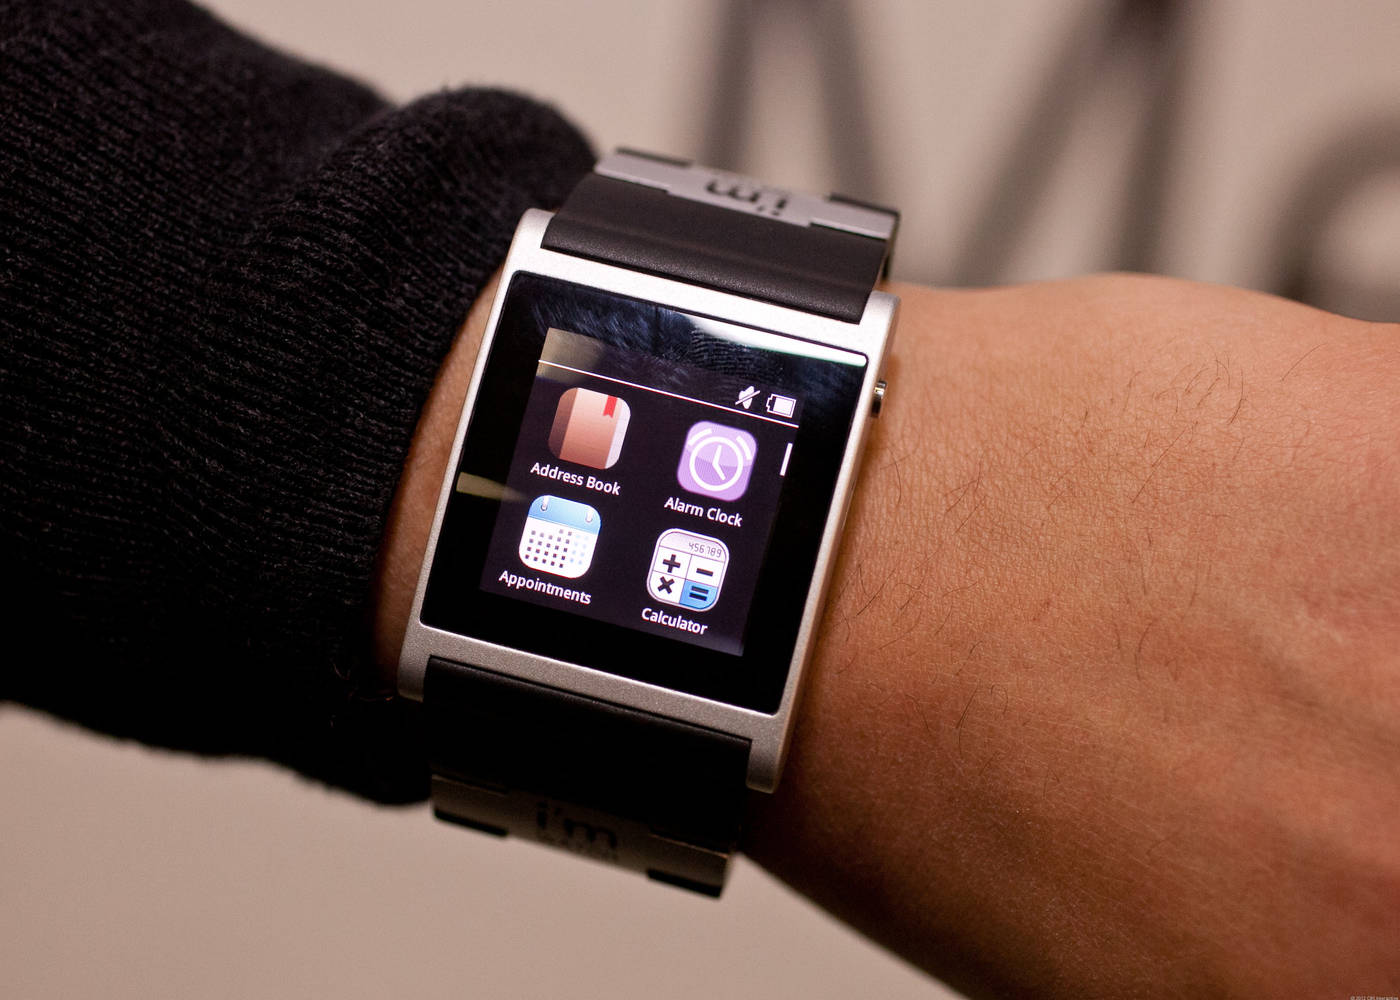 Samsung Galaxy Gear specs and images - 6